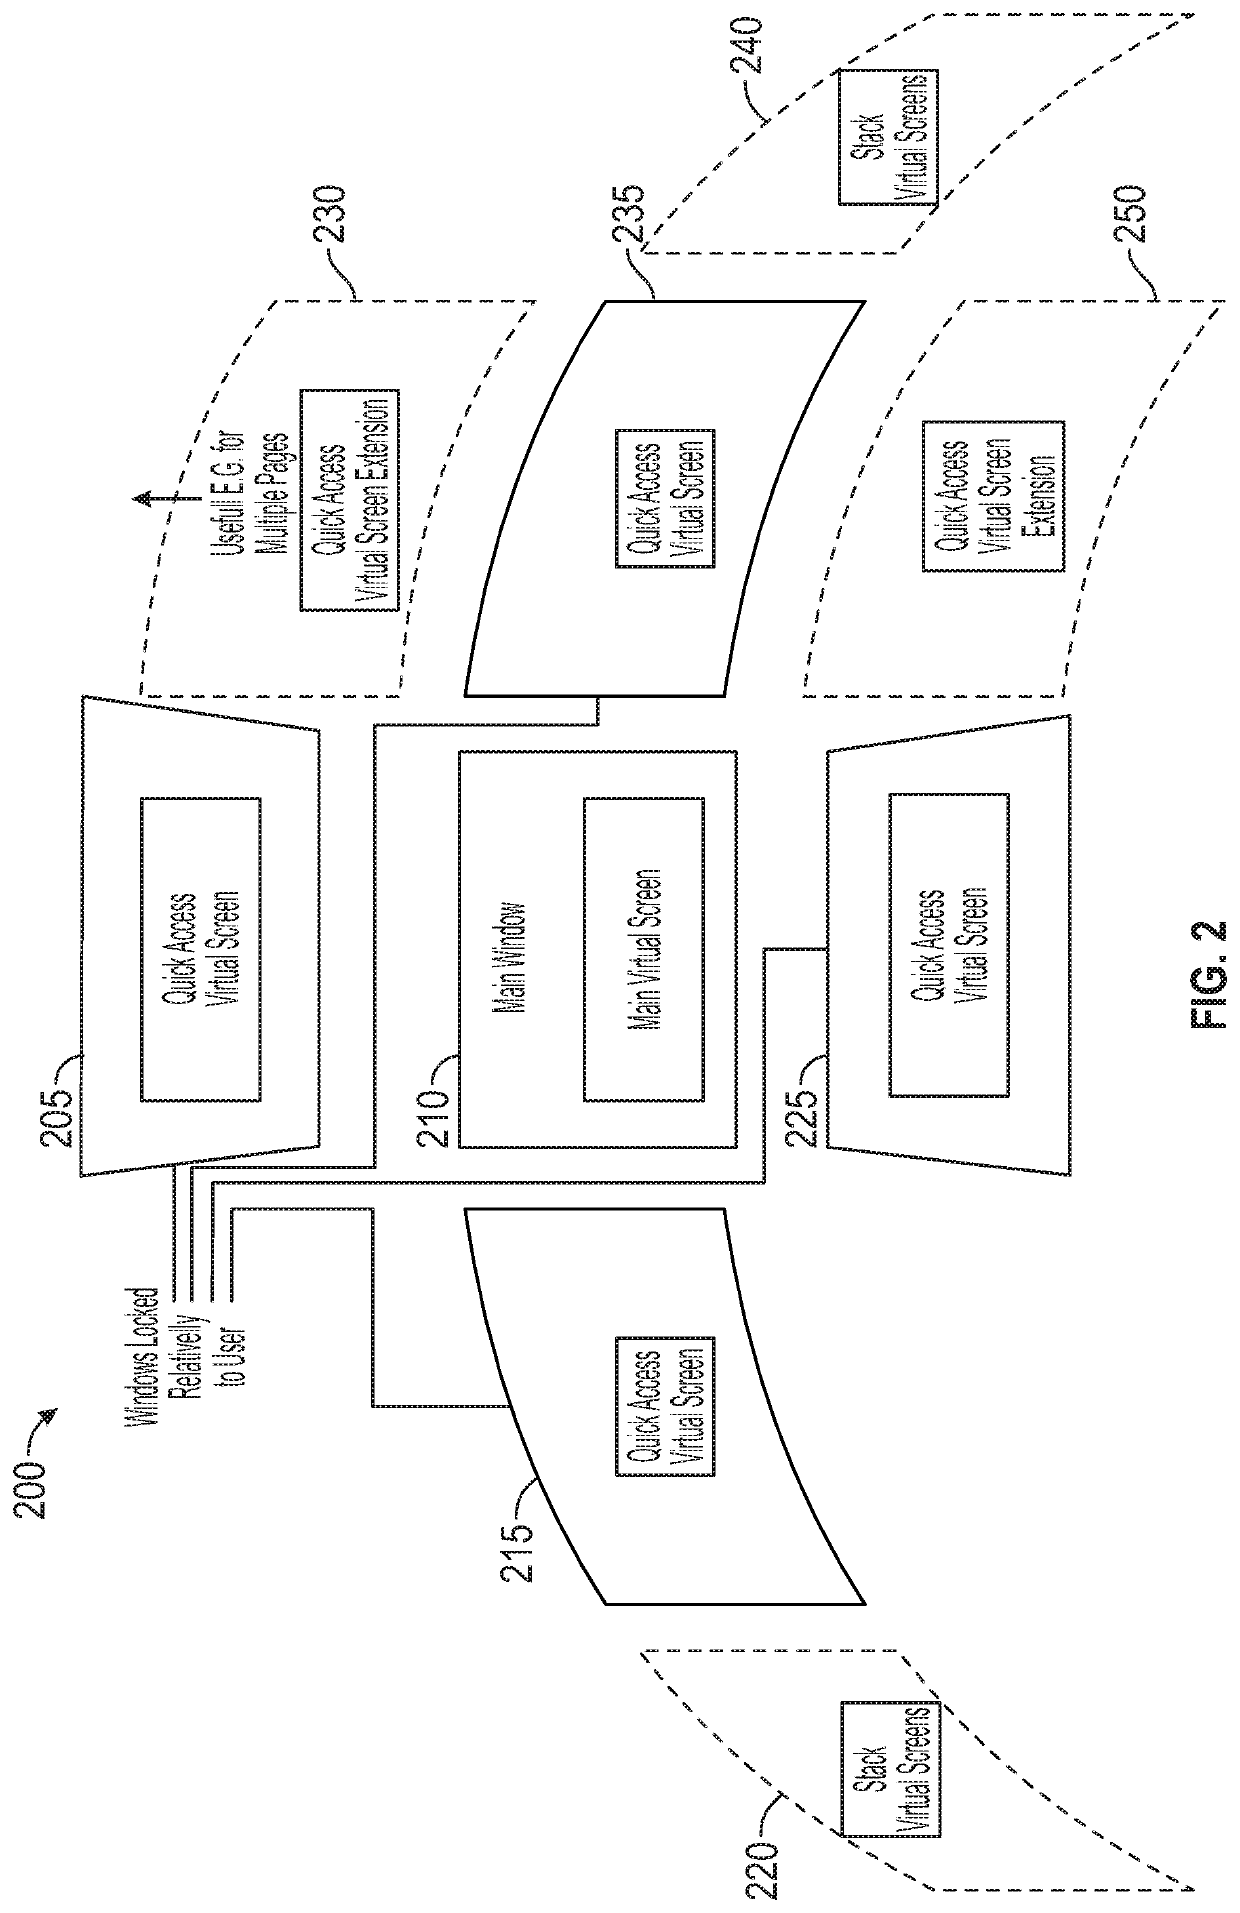 Method and system for user-related multi-screen solution for augmented reality for use in performing maintenance